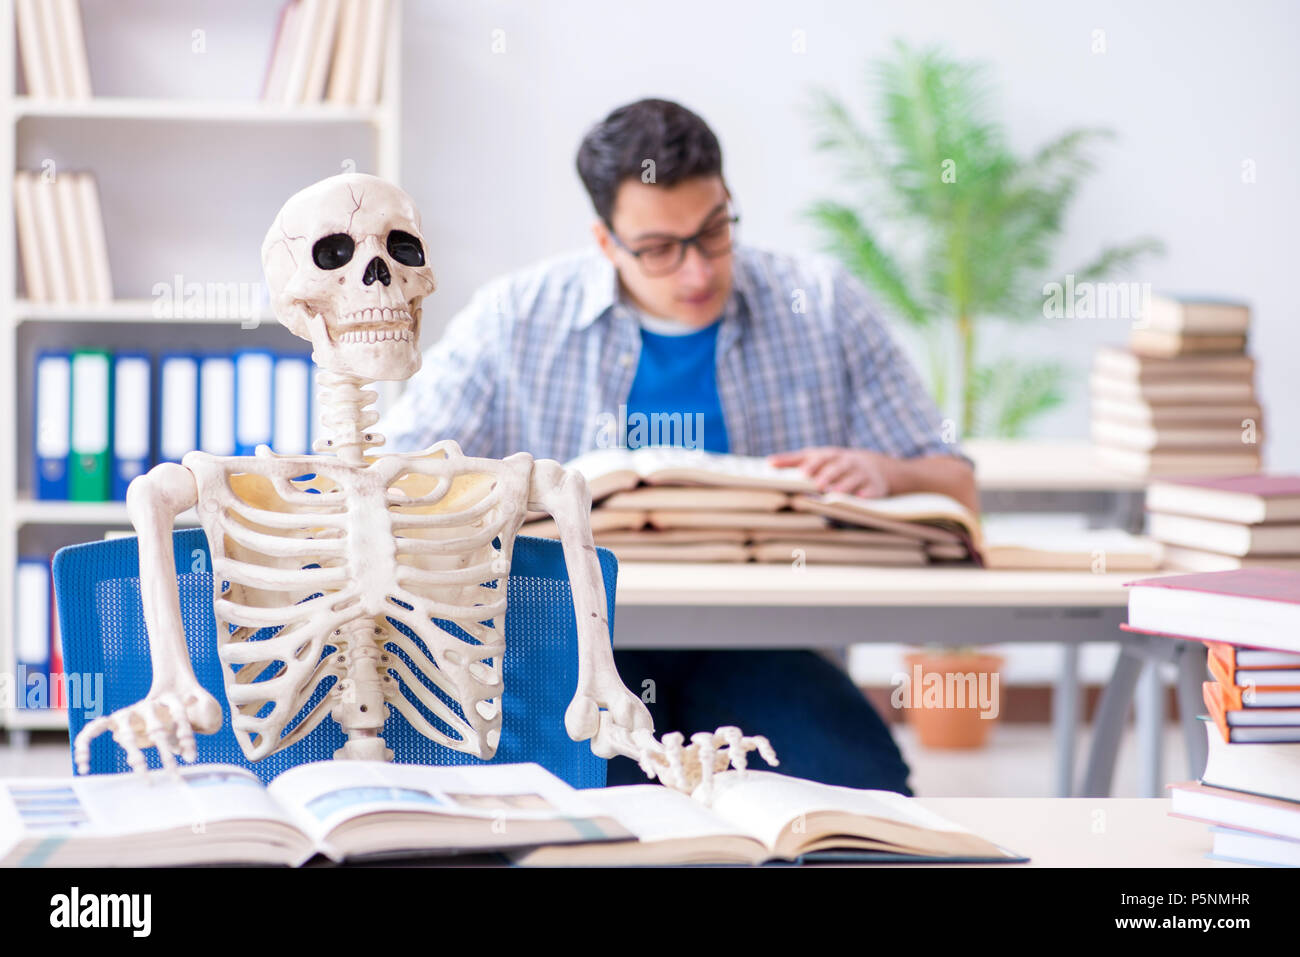 student-skeleton-listening-to-lecture-in-classroom-P5NMHR.jpg